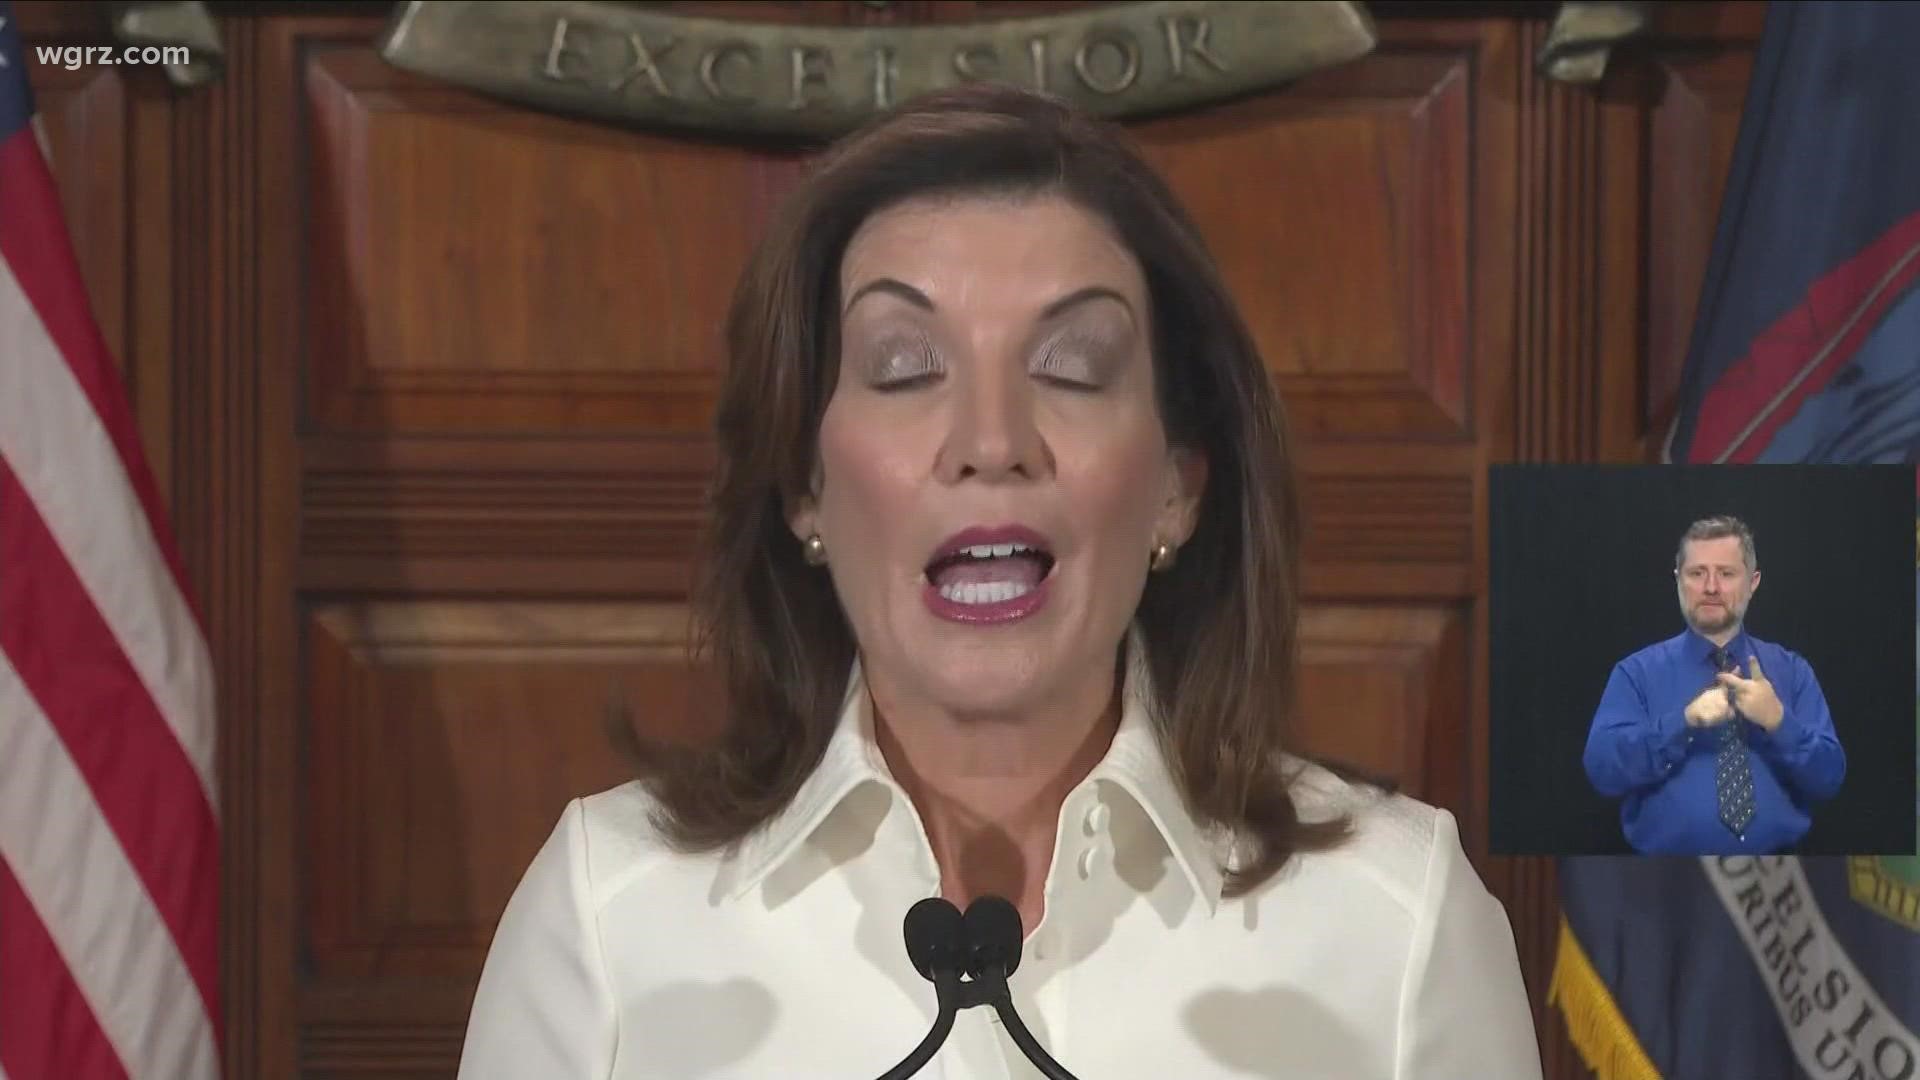 Governor Hochul takes office and she tackled